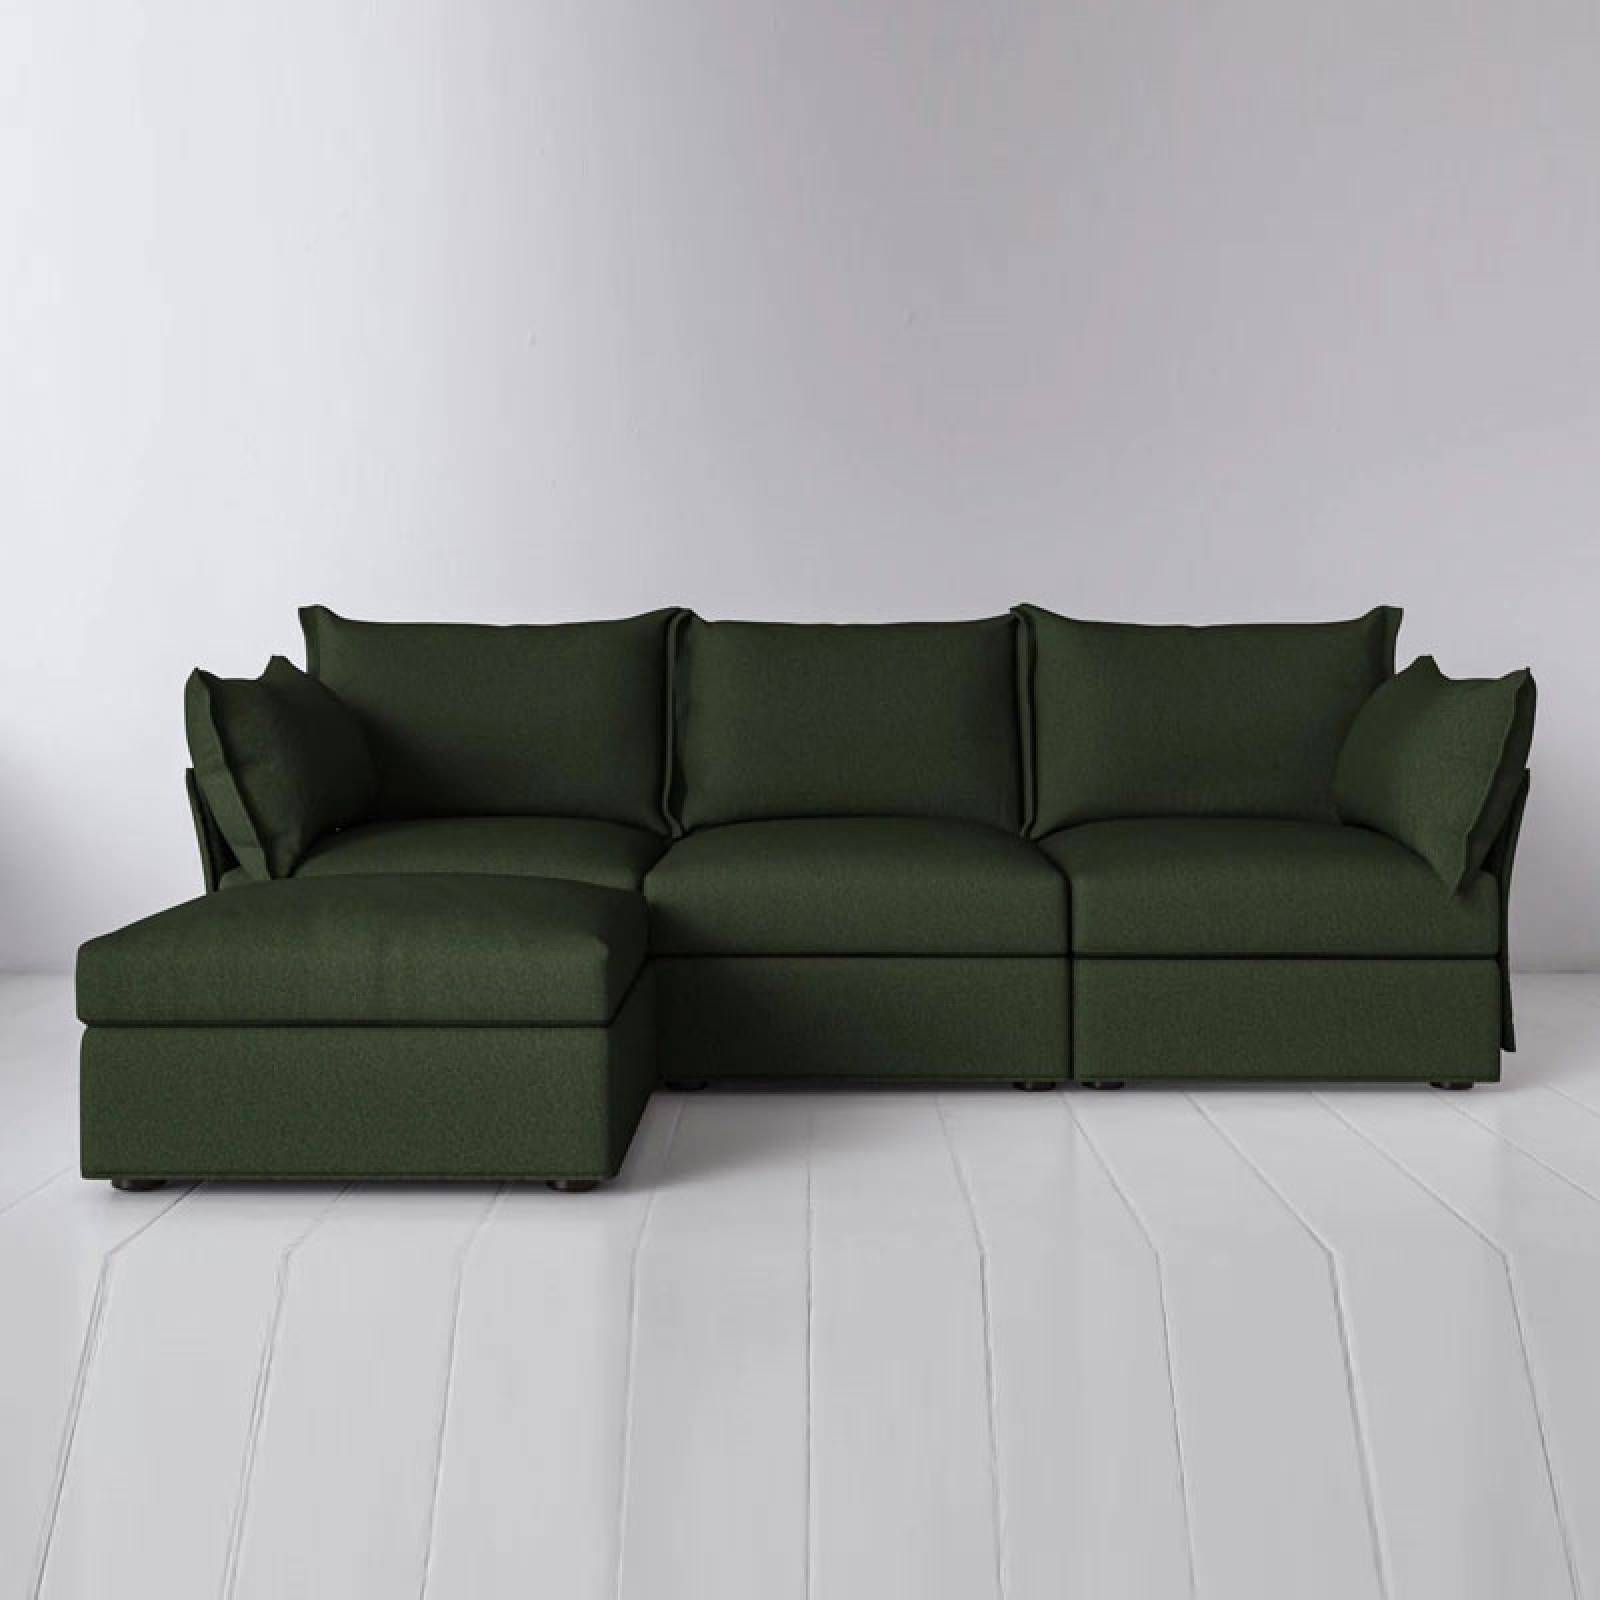 Swyft - Model 06 - 3 Seater Chaise Sofa - Left or Right